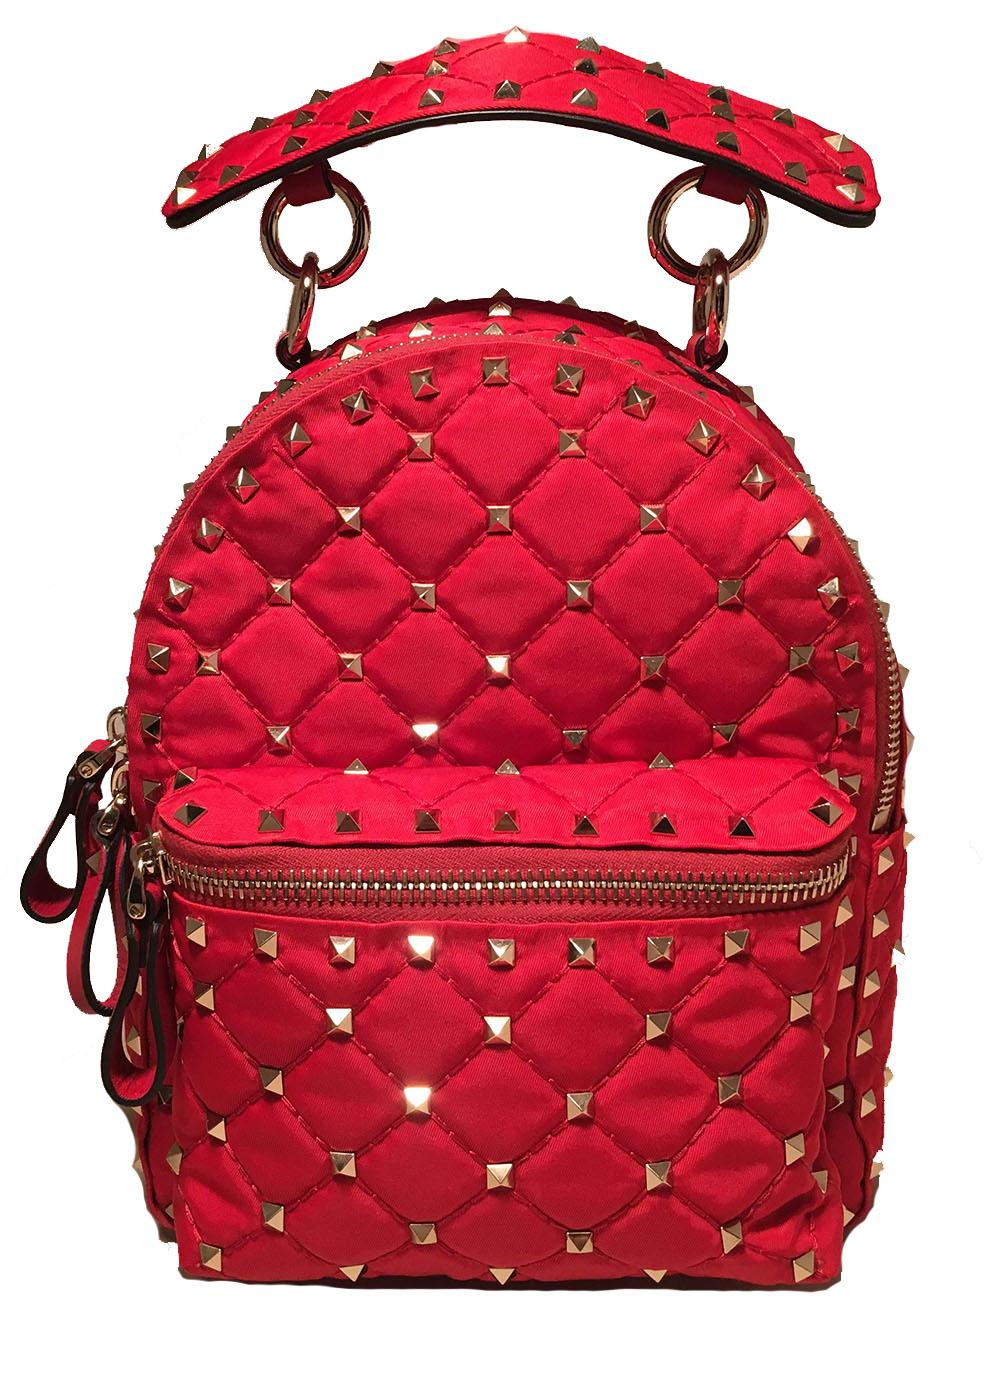 NWOT Valentino Red Nylon Mini Rockstud Backpack in excellent like-new condition. Red quilted nylon exterior trimmed with silver hardware and studs throughout and red leather.  Front zip exterior pocket. Full zip closure opens to red nylon interior